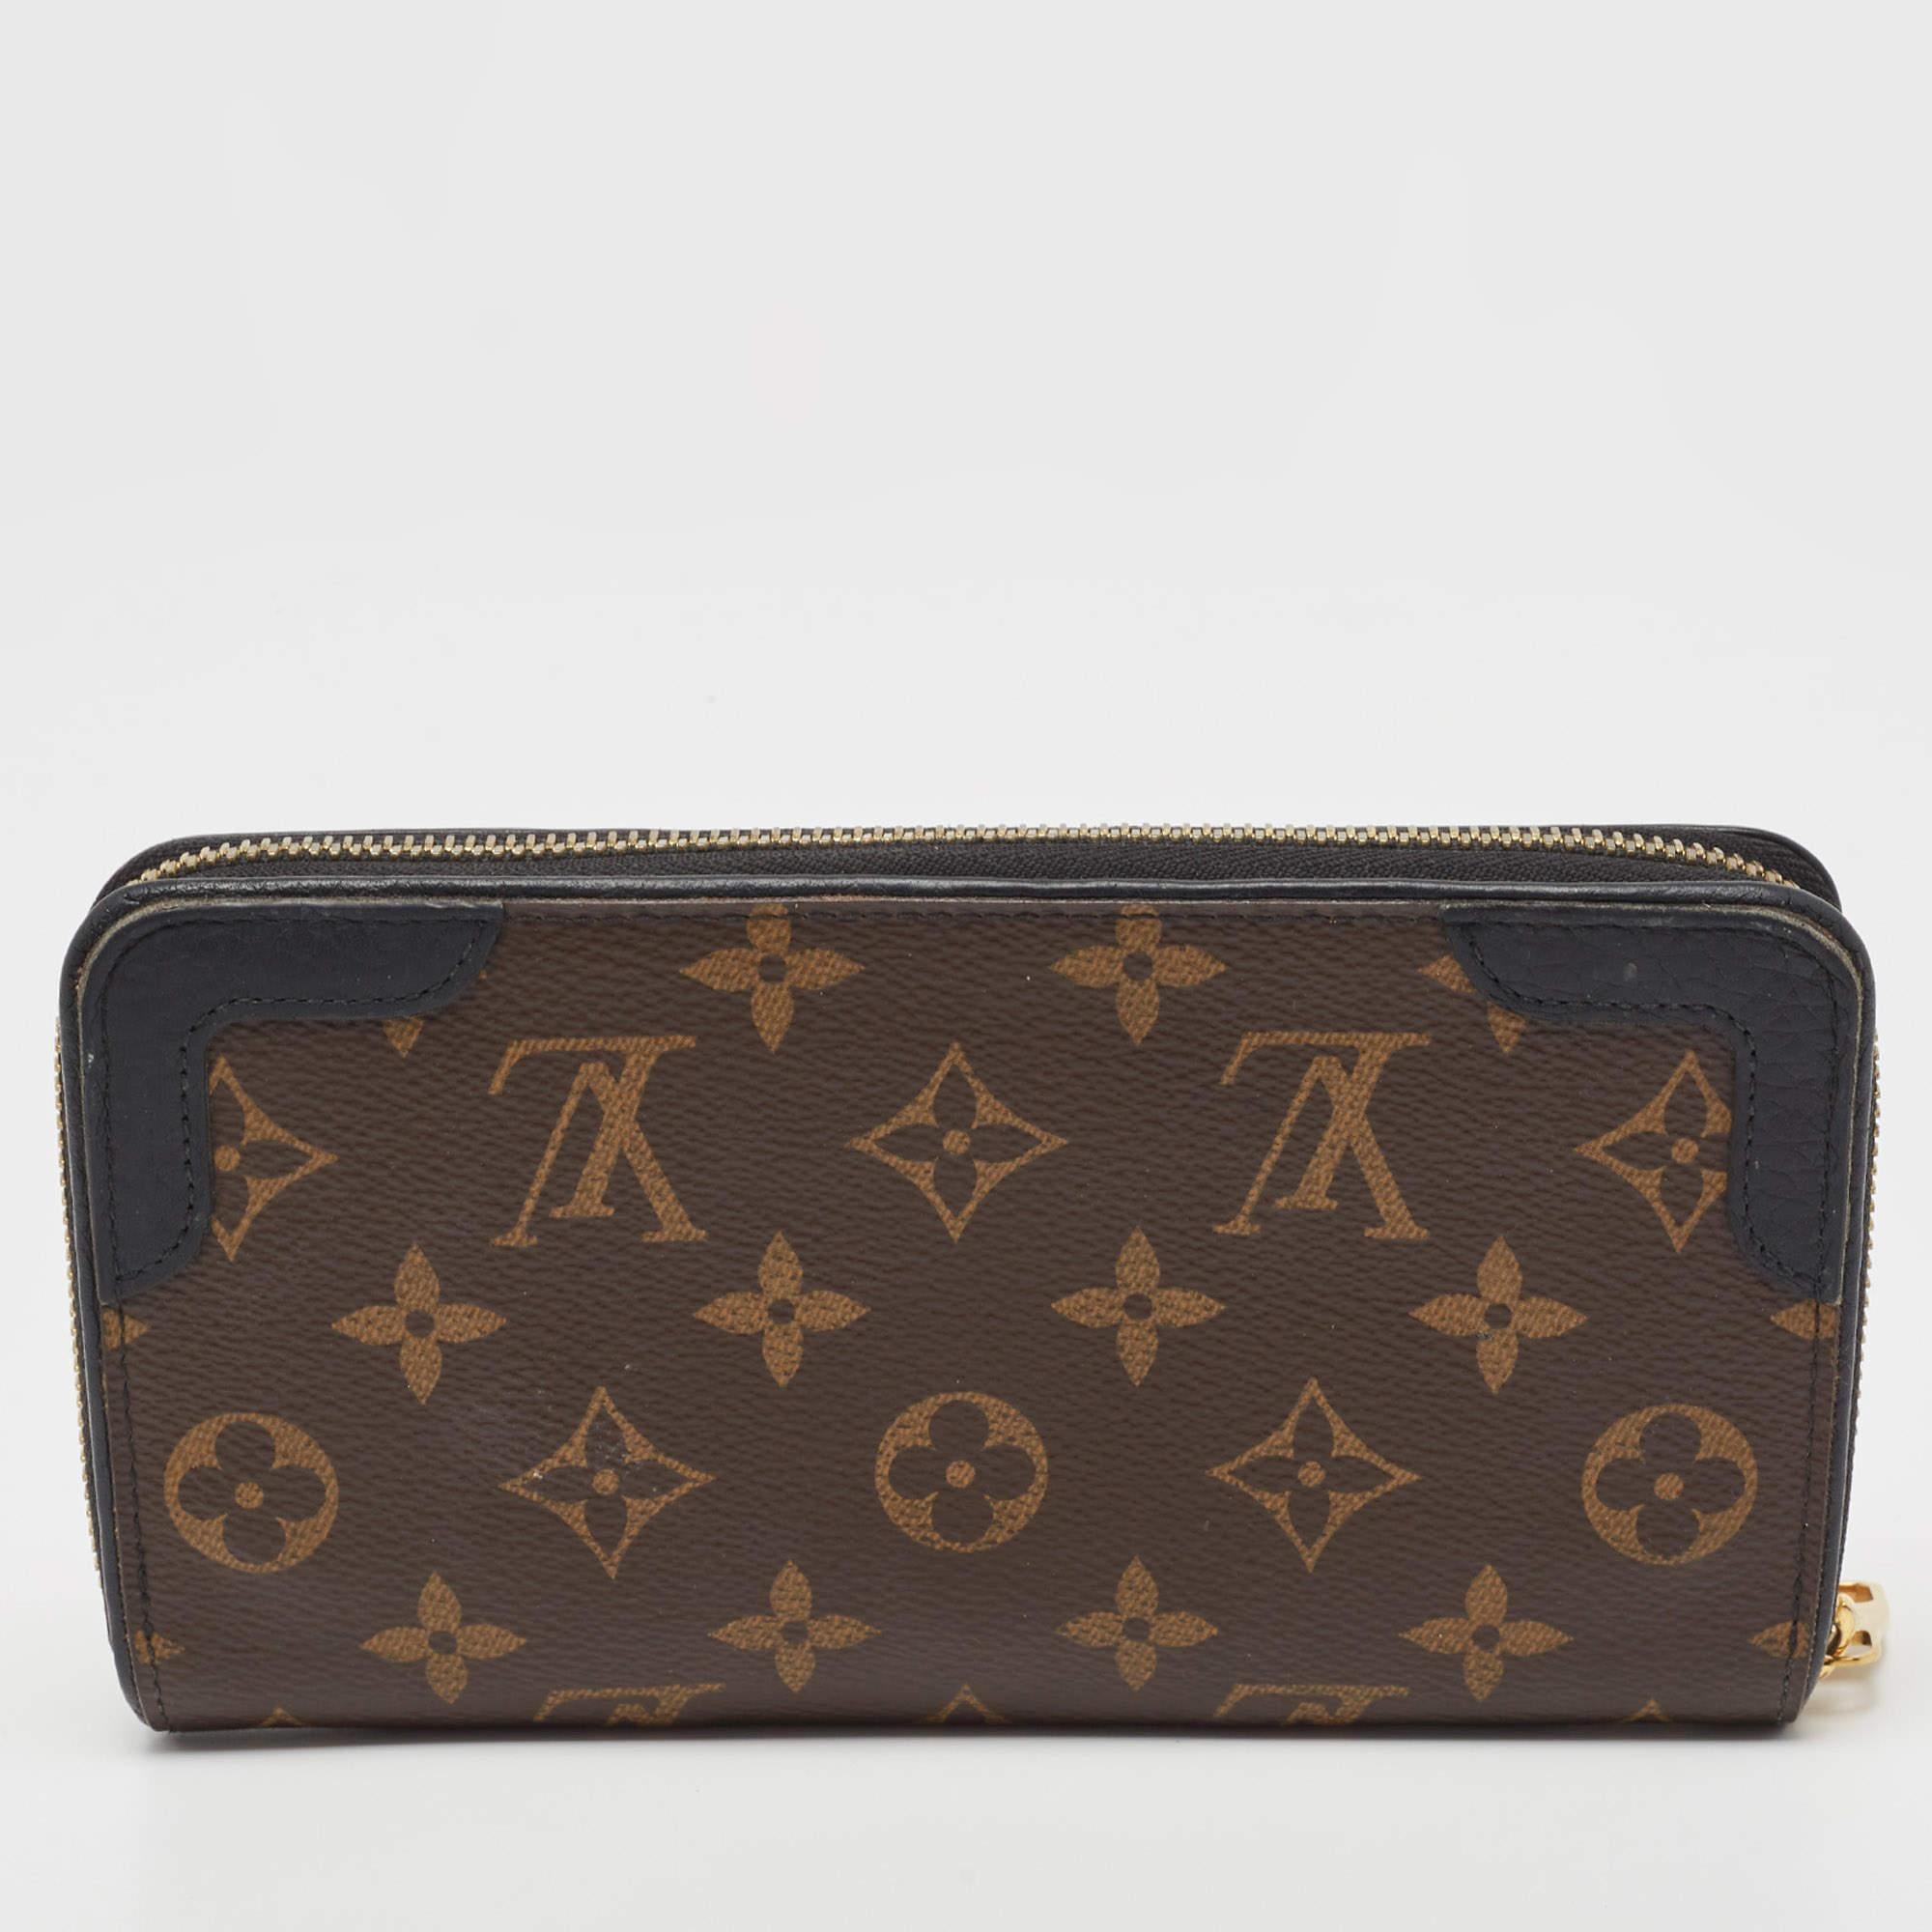 This Louis Vuitton Zippy wallet is conveniently designed for everyday use. Crafted from Monogram canvas and leather, the wallet has a wide zip closure that opens to reveal multiple slots, leather and canvas-lined compartments, and a zip pocket for